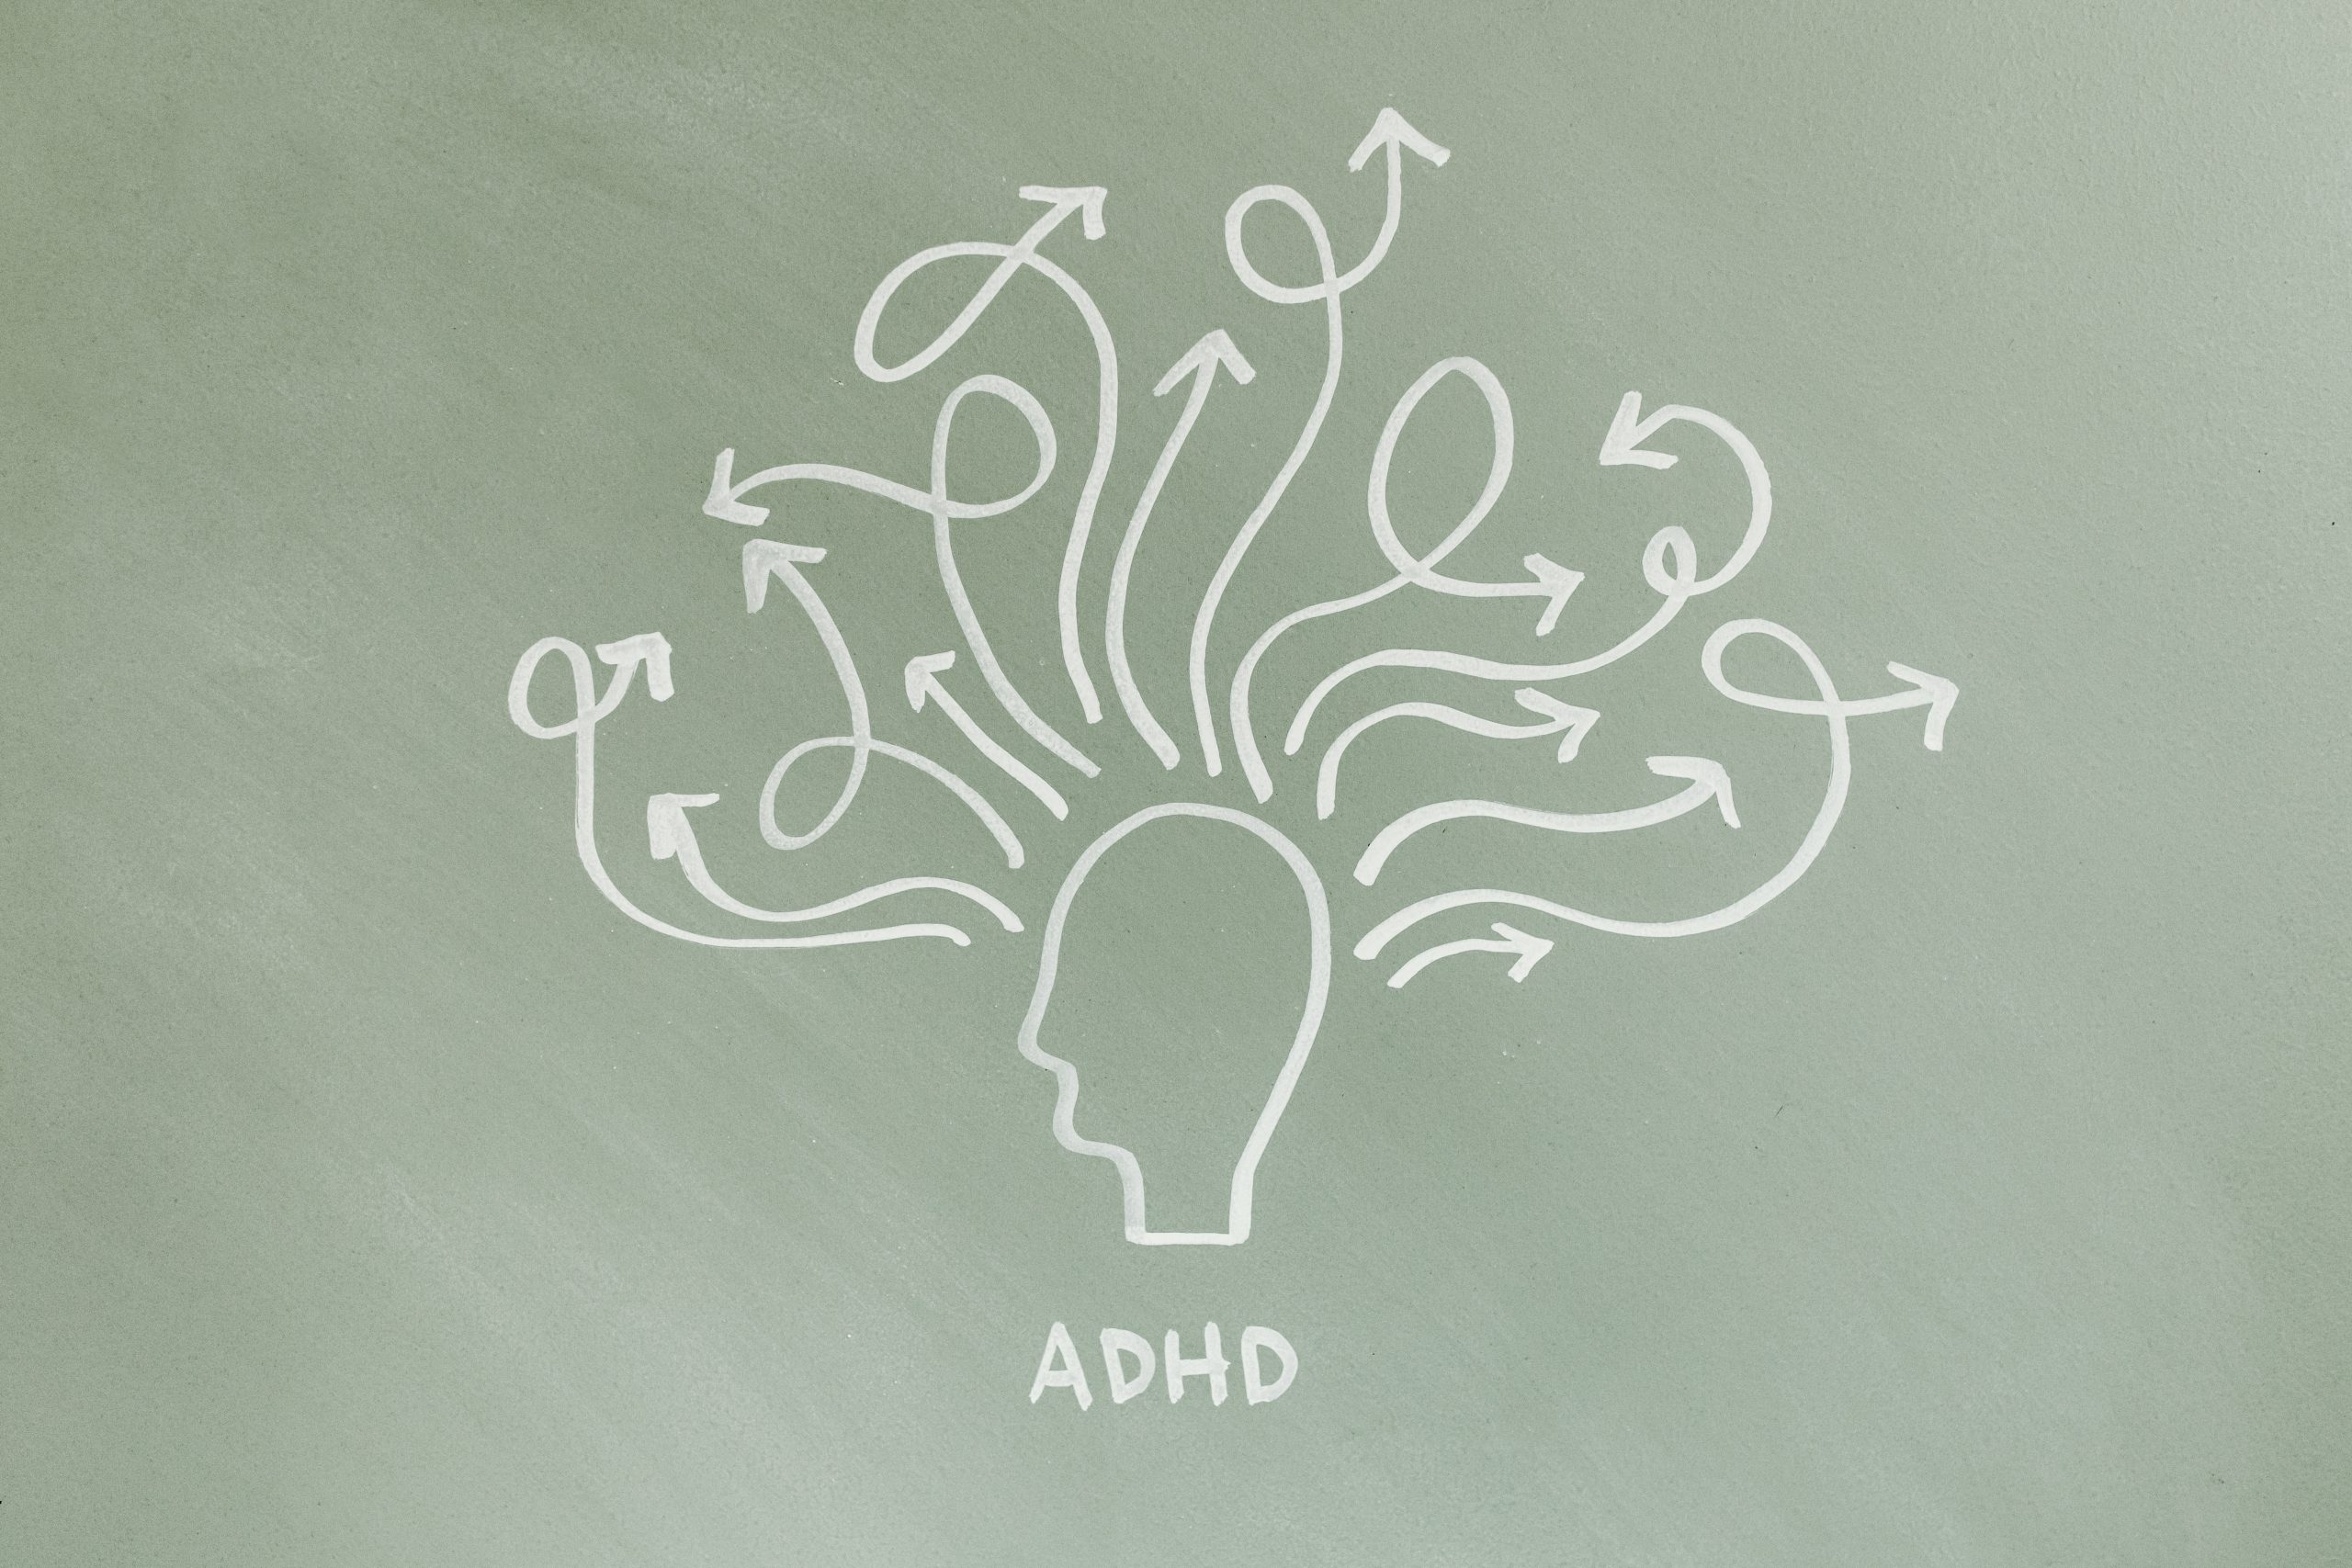 challenges-continue-adhd-medication-shortages-impacting-treatment